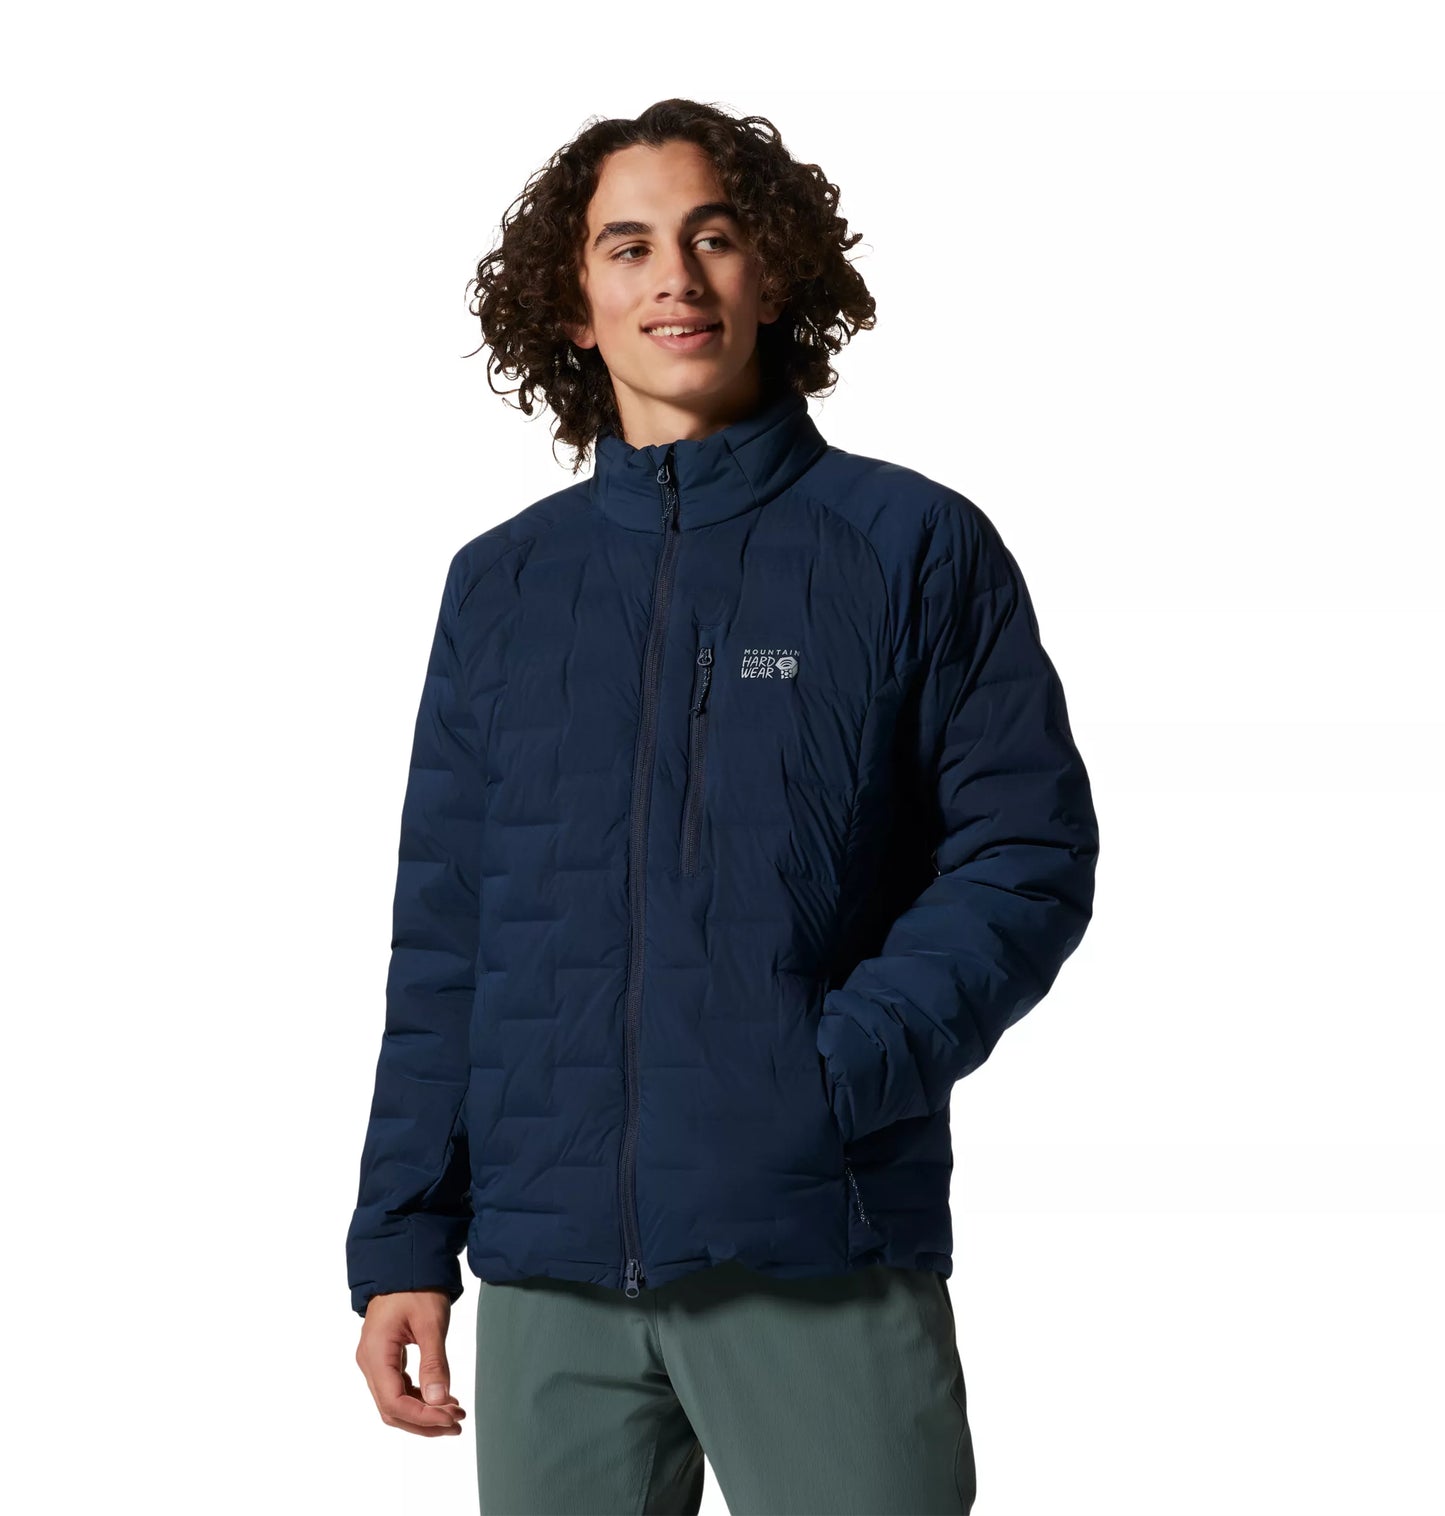 Men's Stretchdown™ Jacket Big Adventure Outfitters